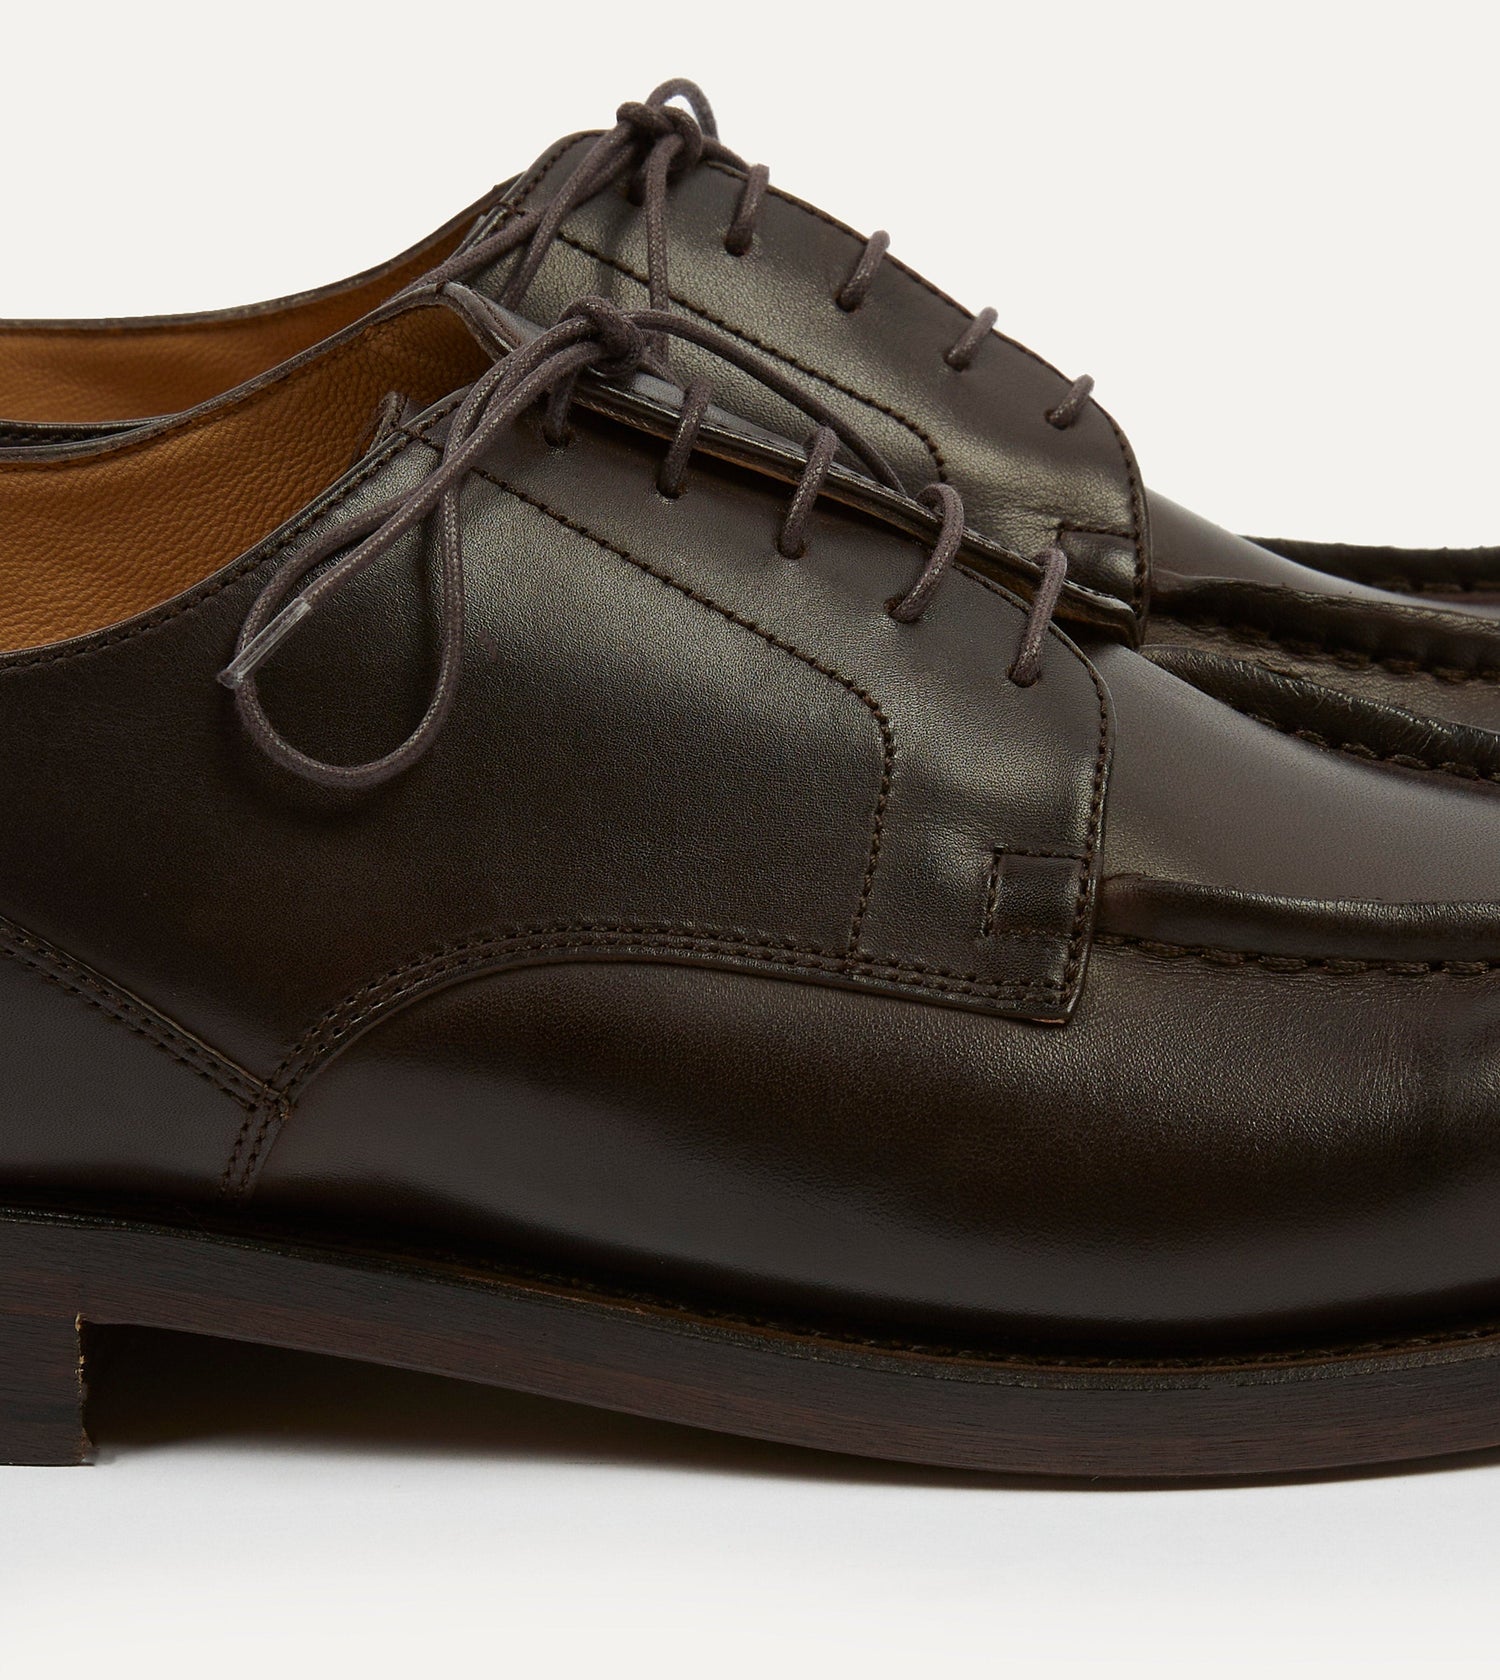 Paraboot Chambord Brown Calf Leather Derby Shoe